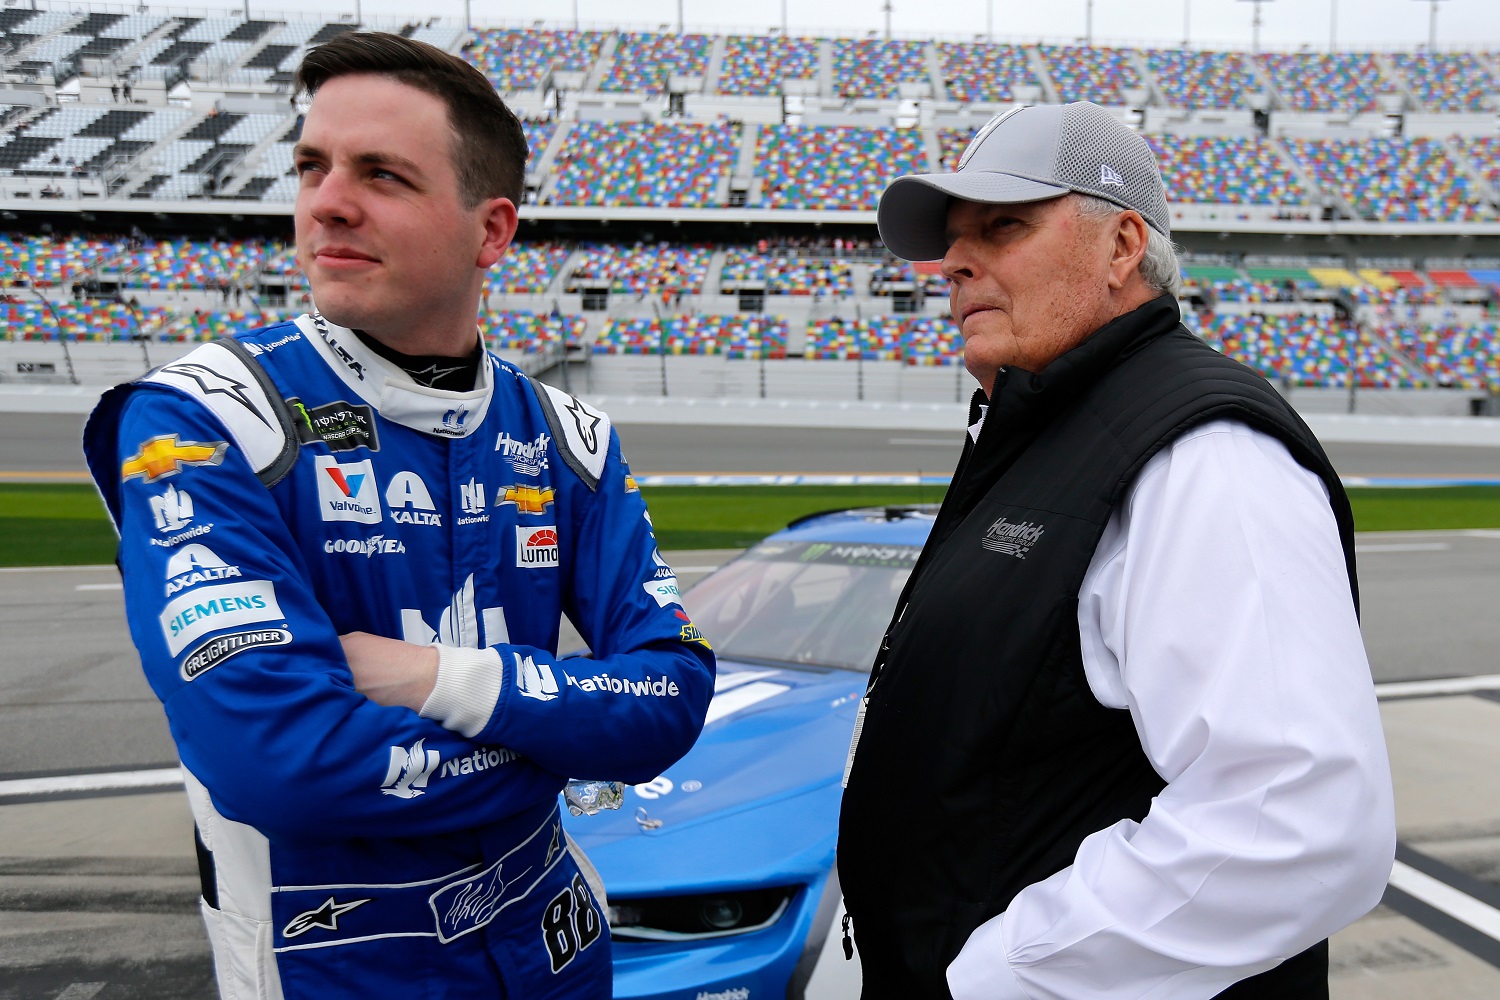 Alex Bowman, driver of the No. 48 Ally Chevy, talks with team owner Rick Hendrick.